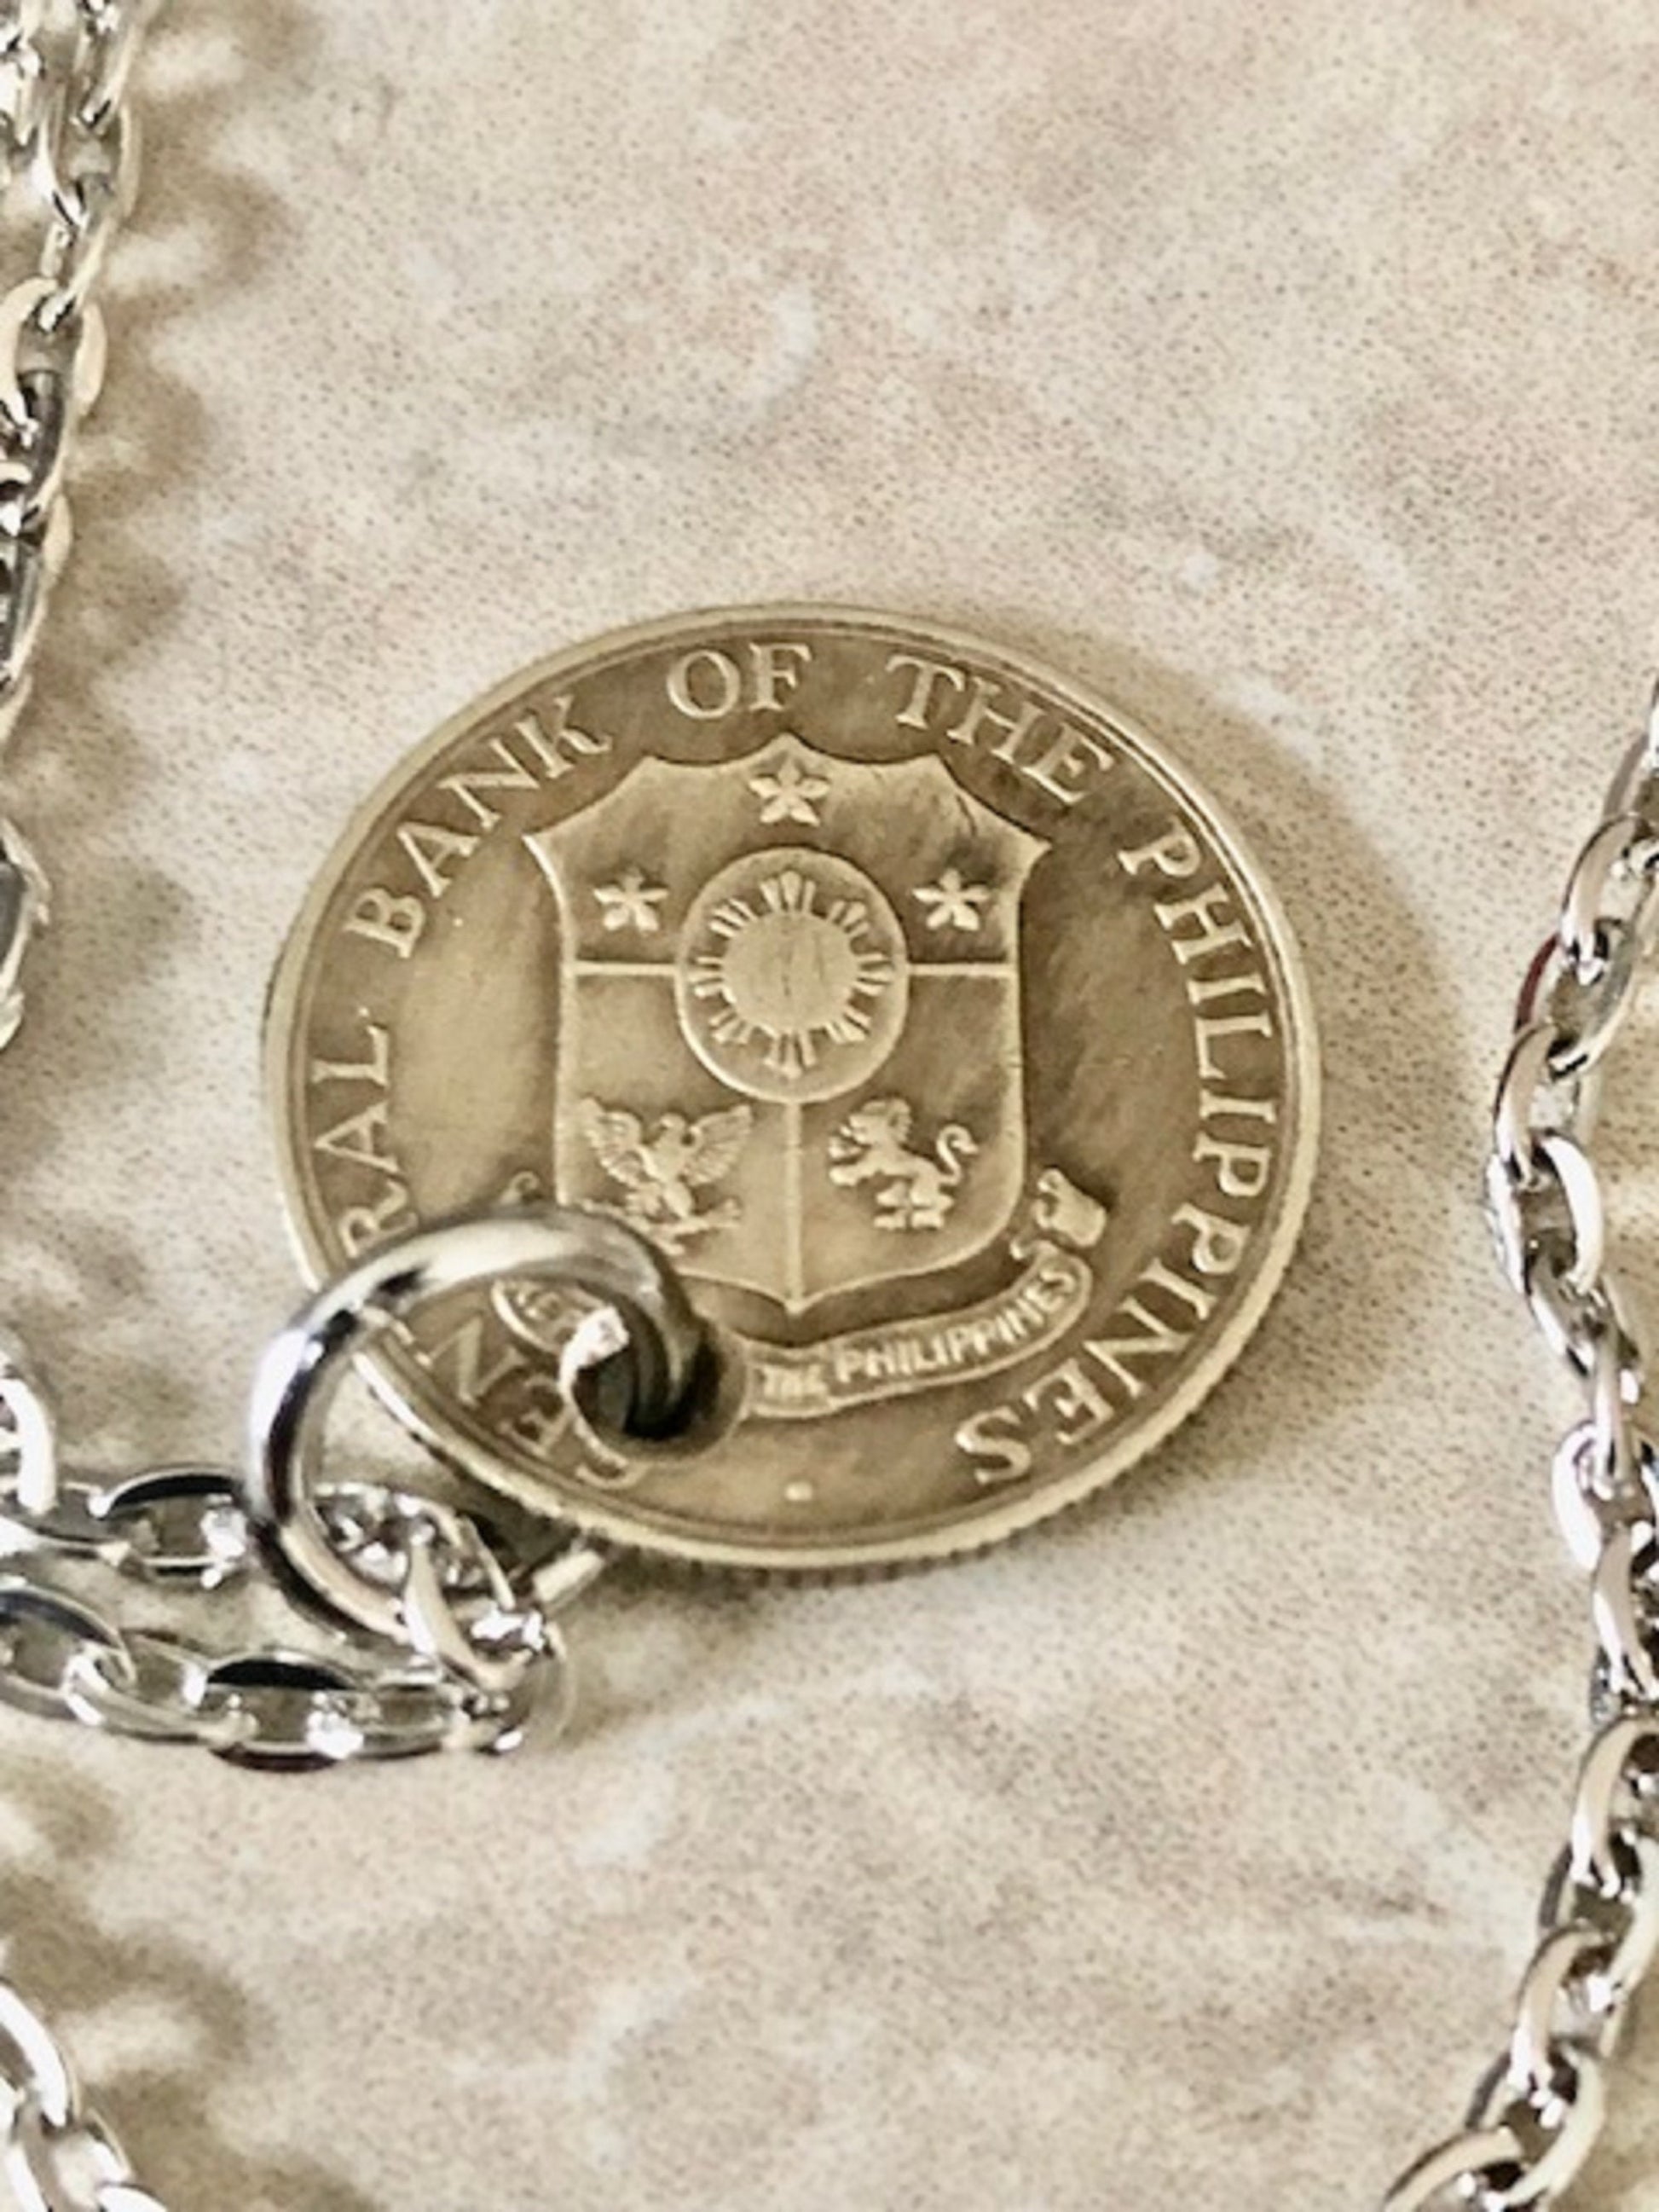 Philippines Coin Necklace Pendant Pilipinas 10 Centavos Vintage Custom Made Rare coins - Coin Enthusiast - Handmade Fashion